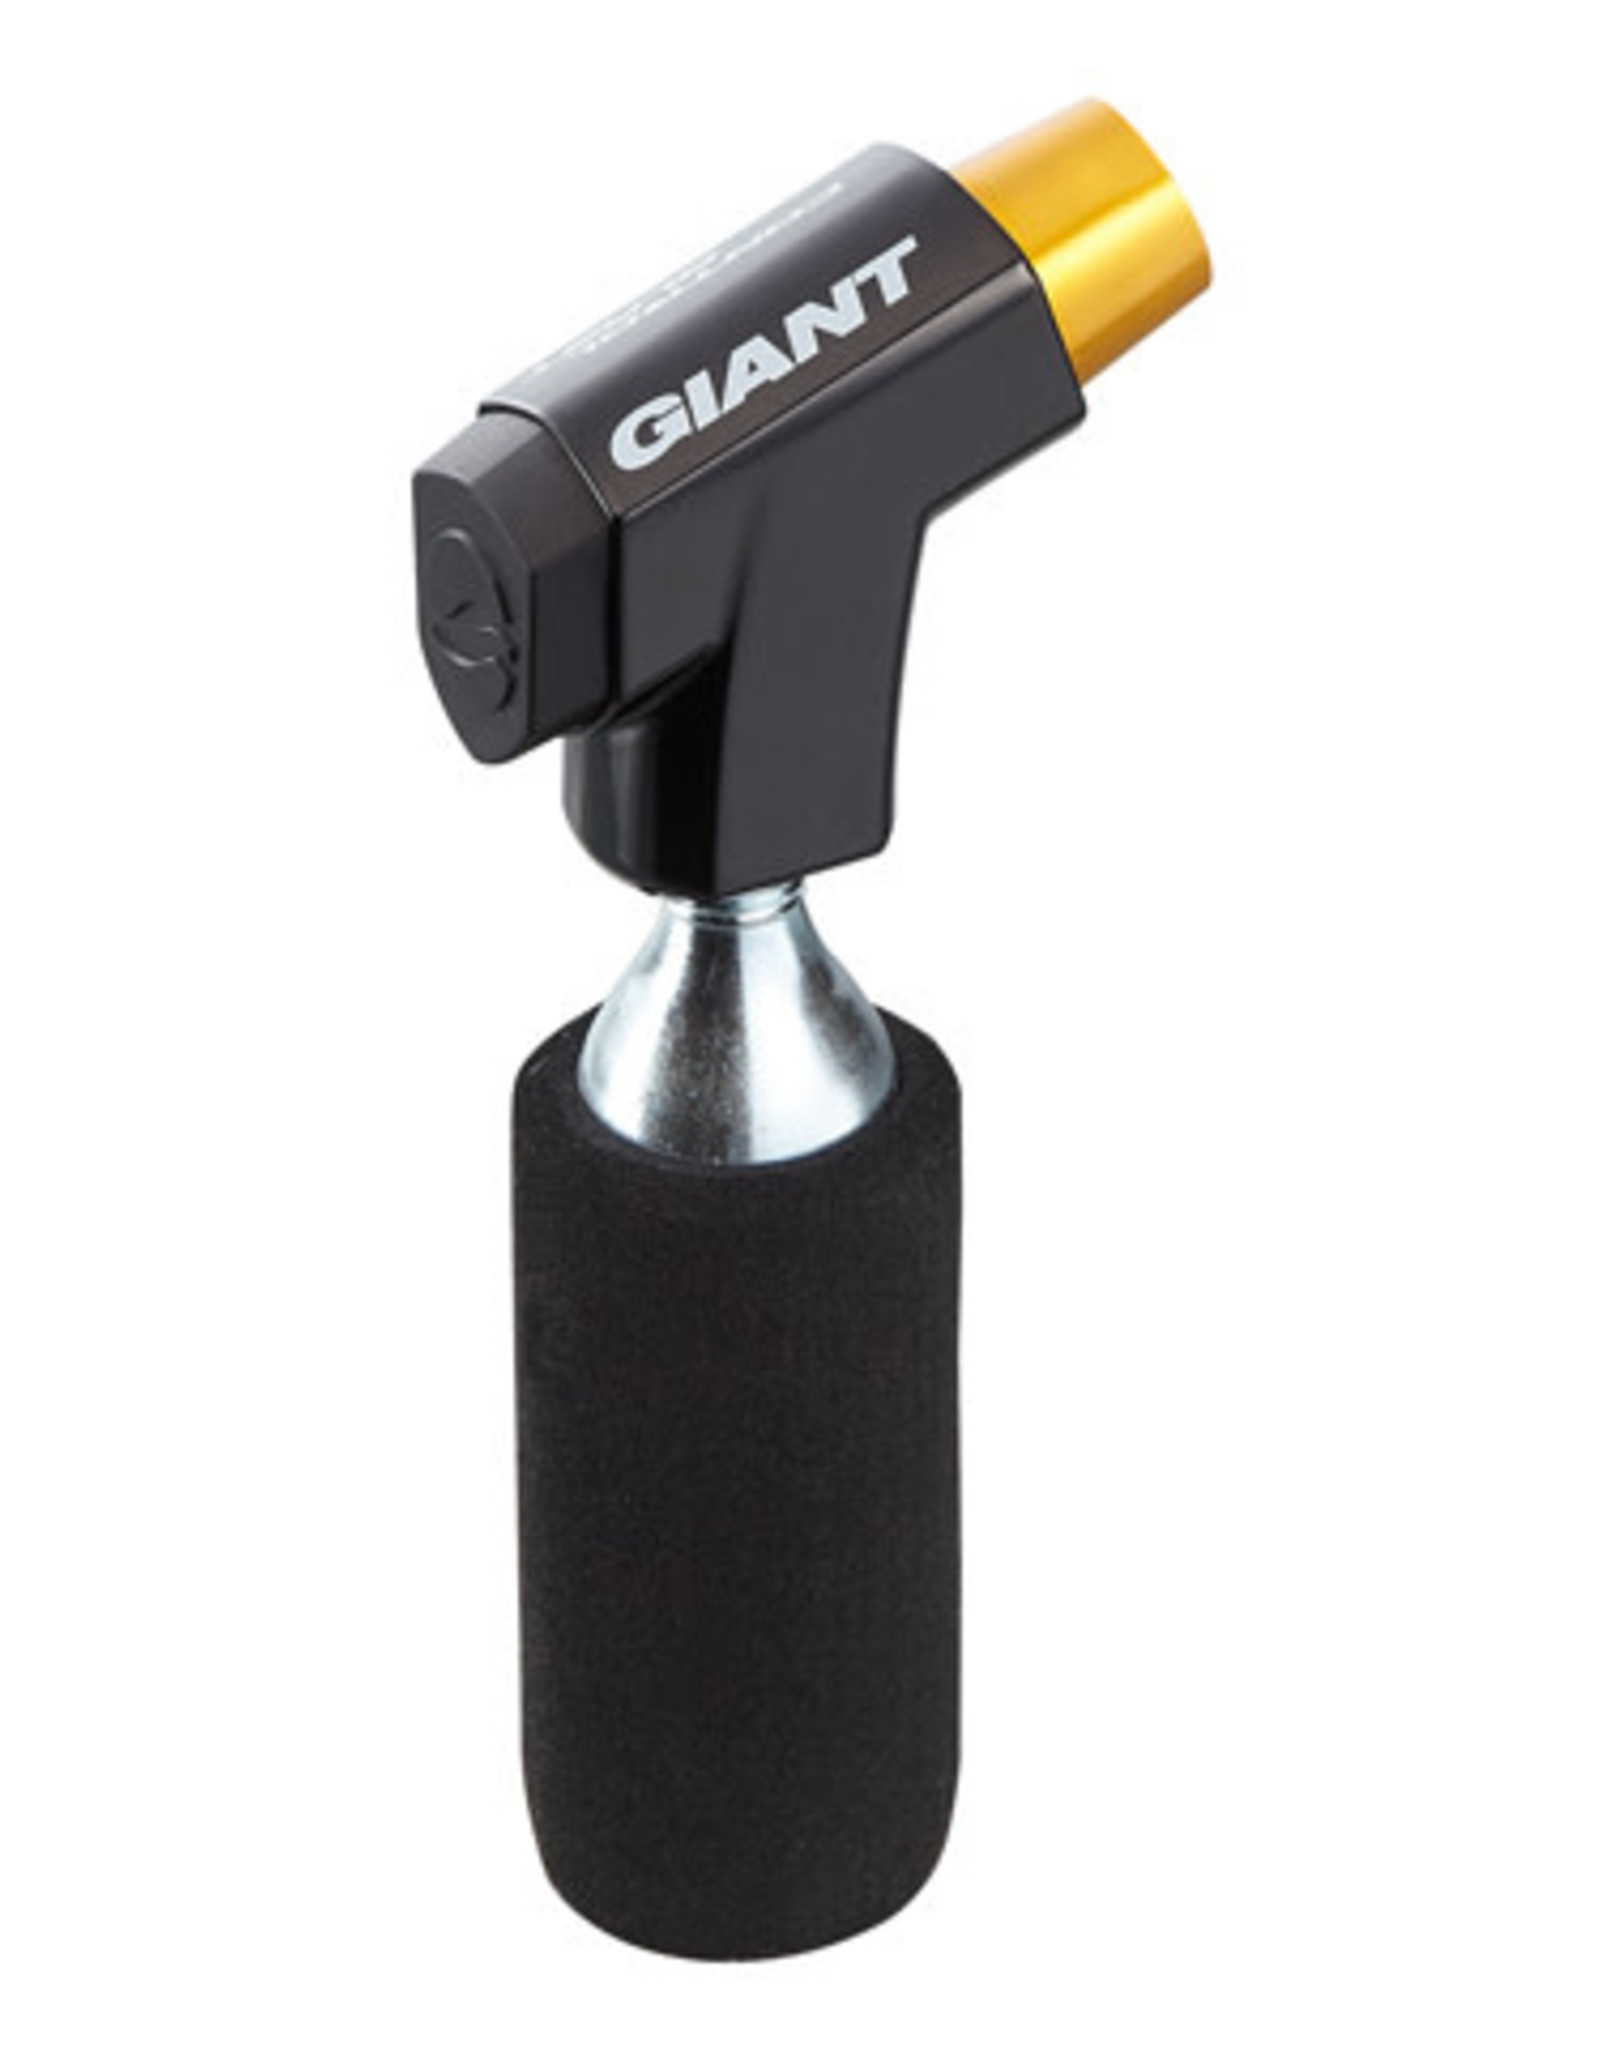 Giant P&A GNT Control Blast 1 CO2 Inflation Kit Black/Gold